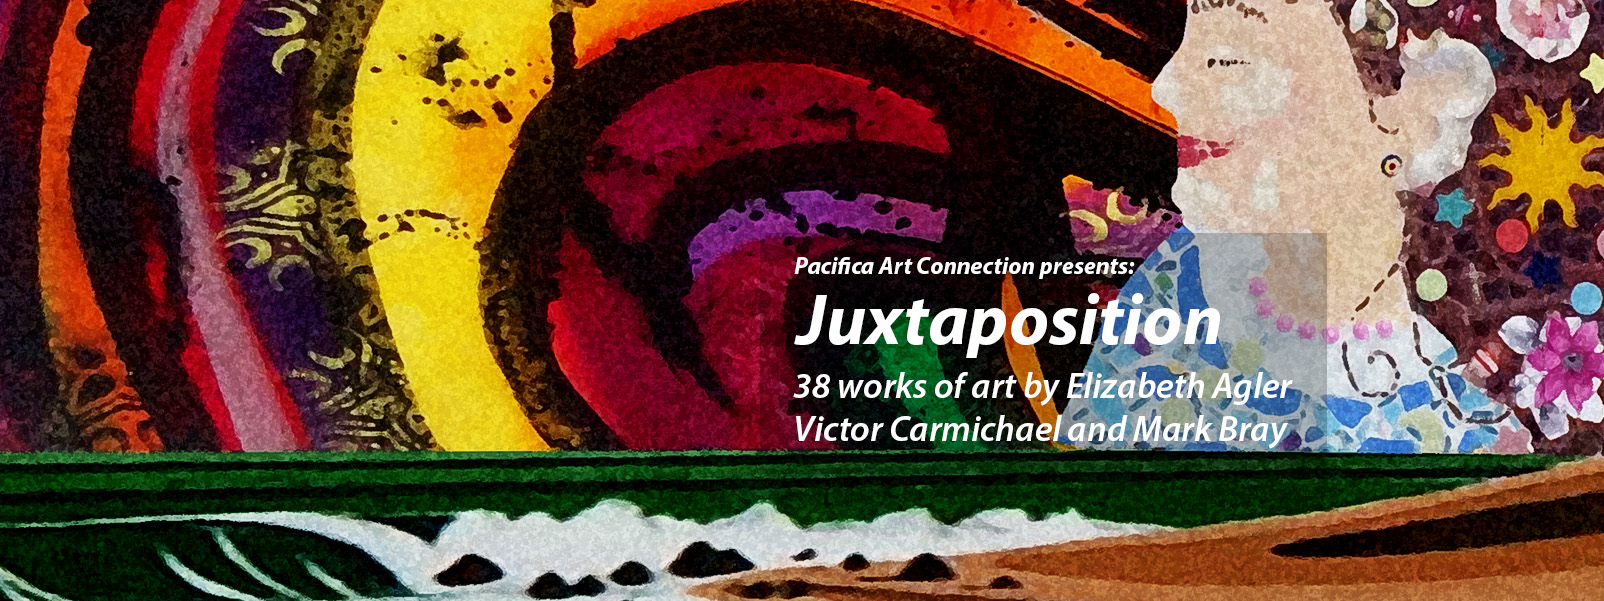 Pacifica Art Connection presents “Juxtaposition”: 38 works of art by Elizabeth Agler, Victor Carmichael and Mark Bray